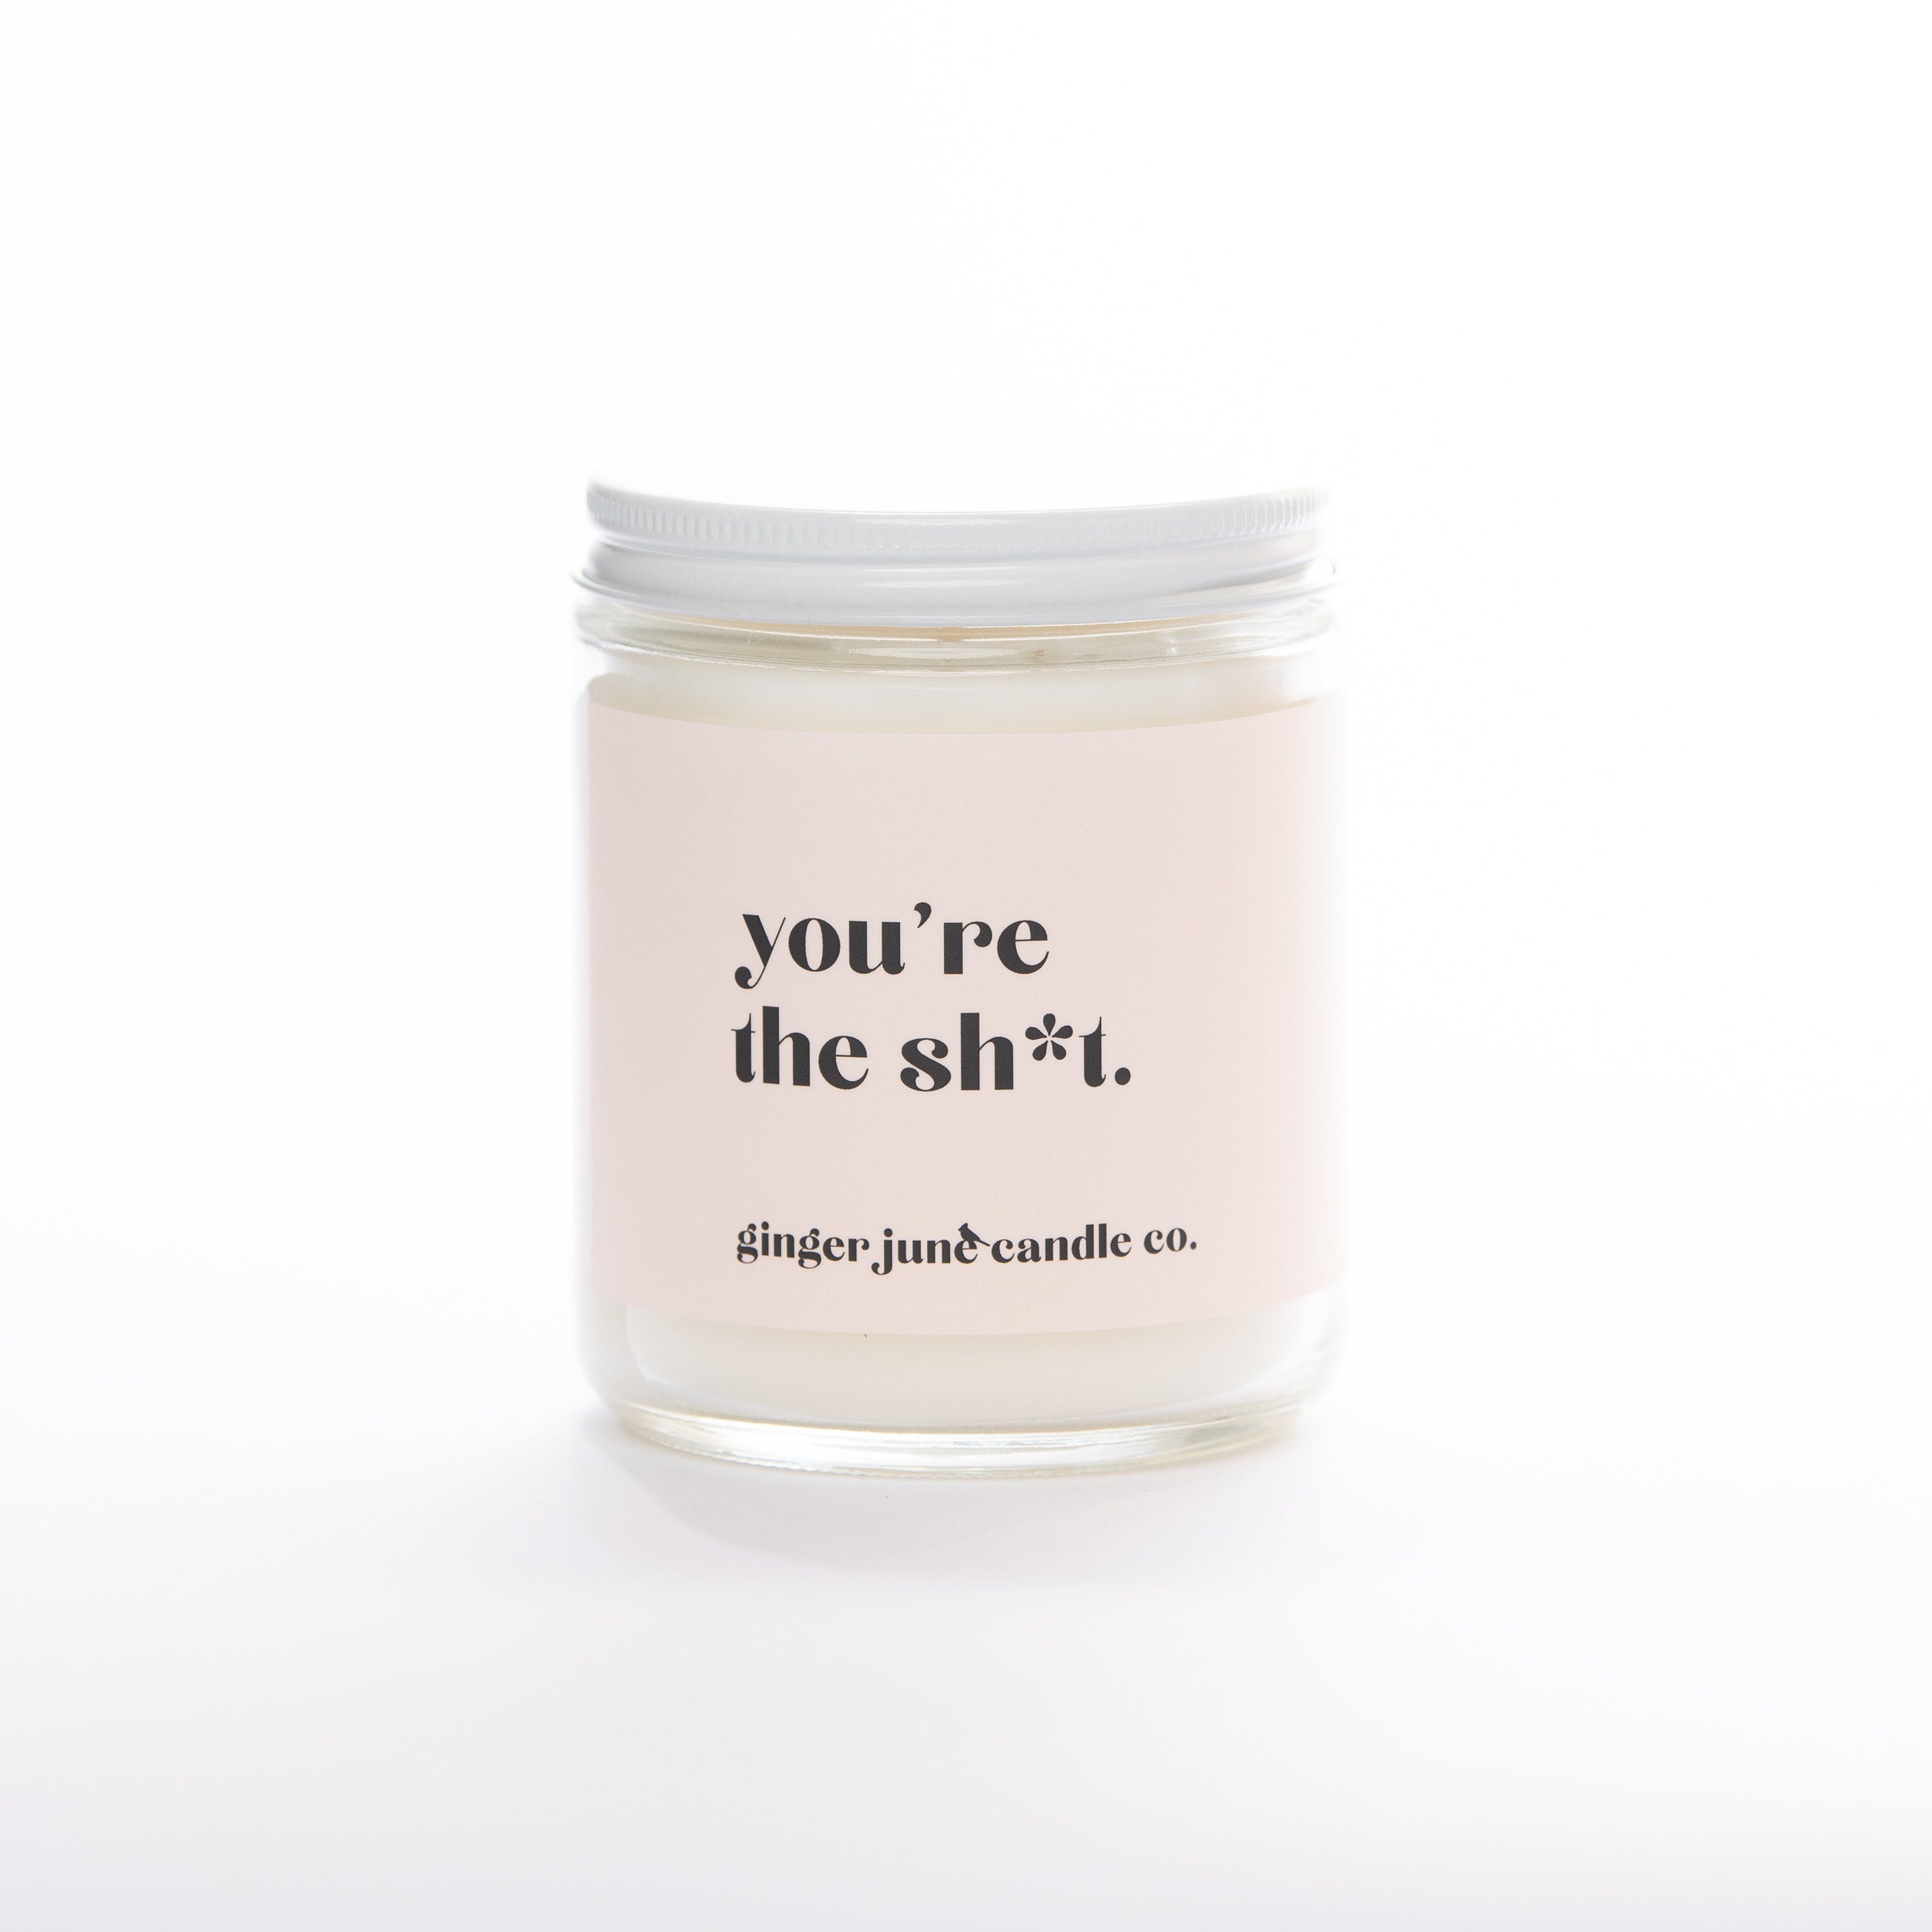 “You’re the Sh*t” Nontoxic Soy Candle